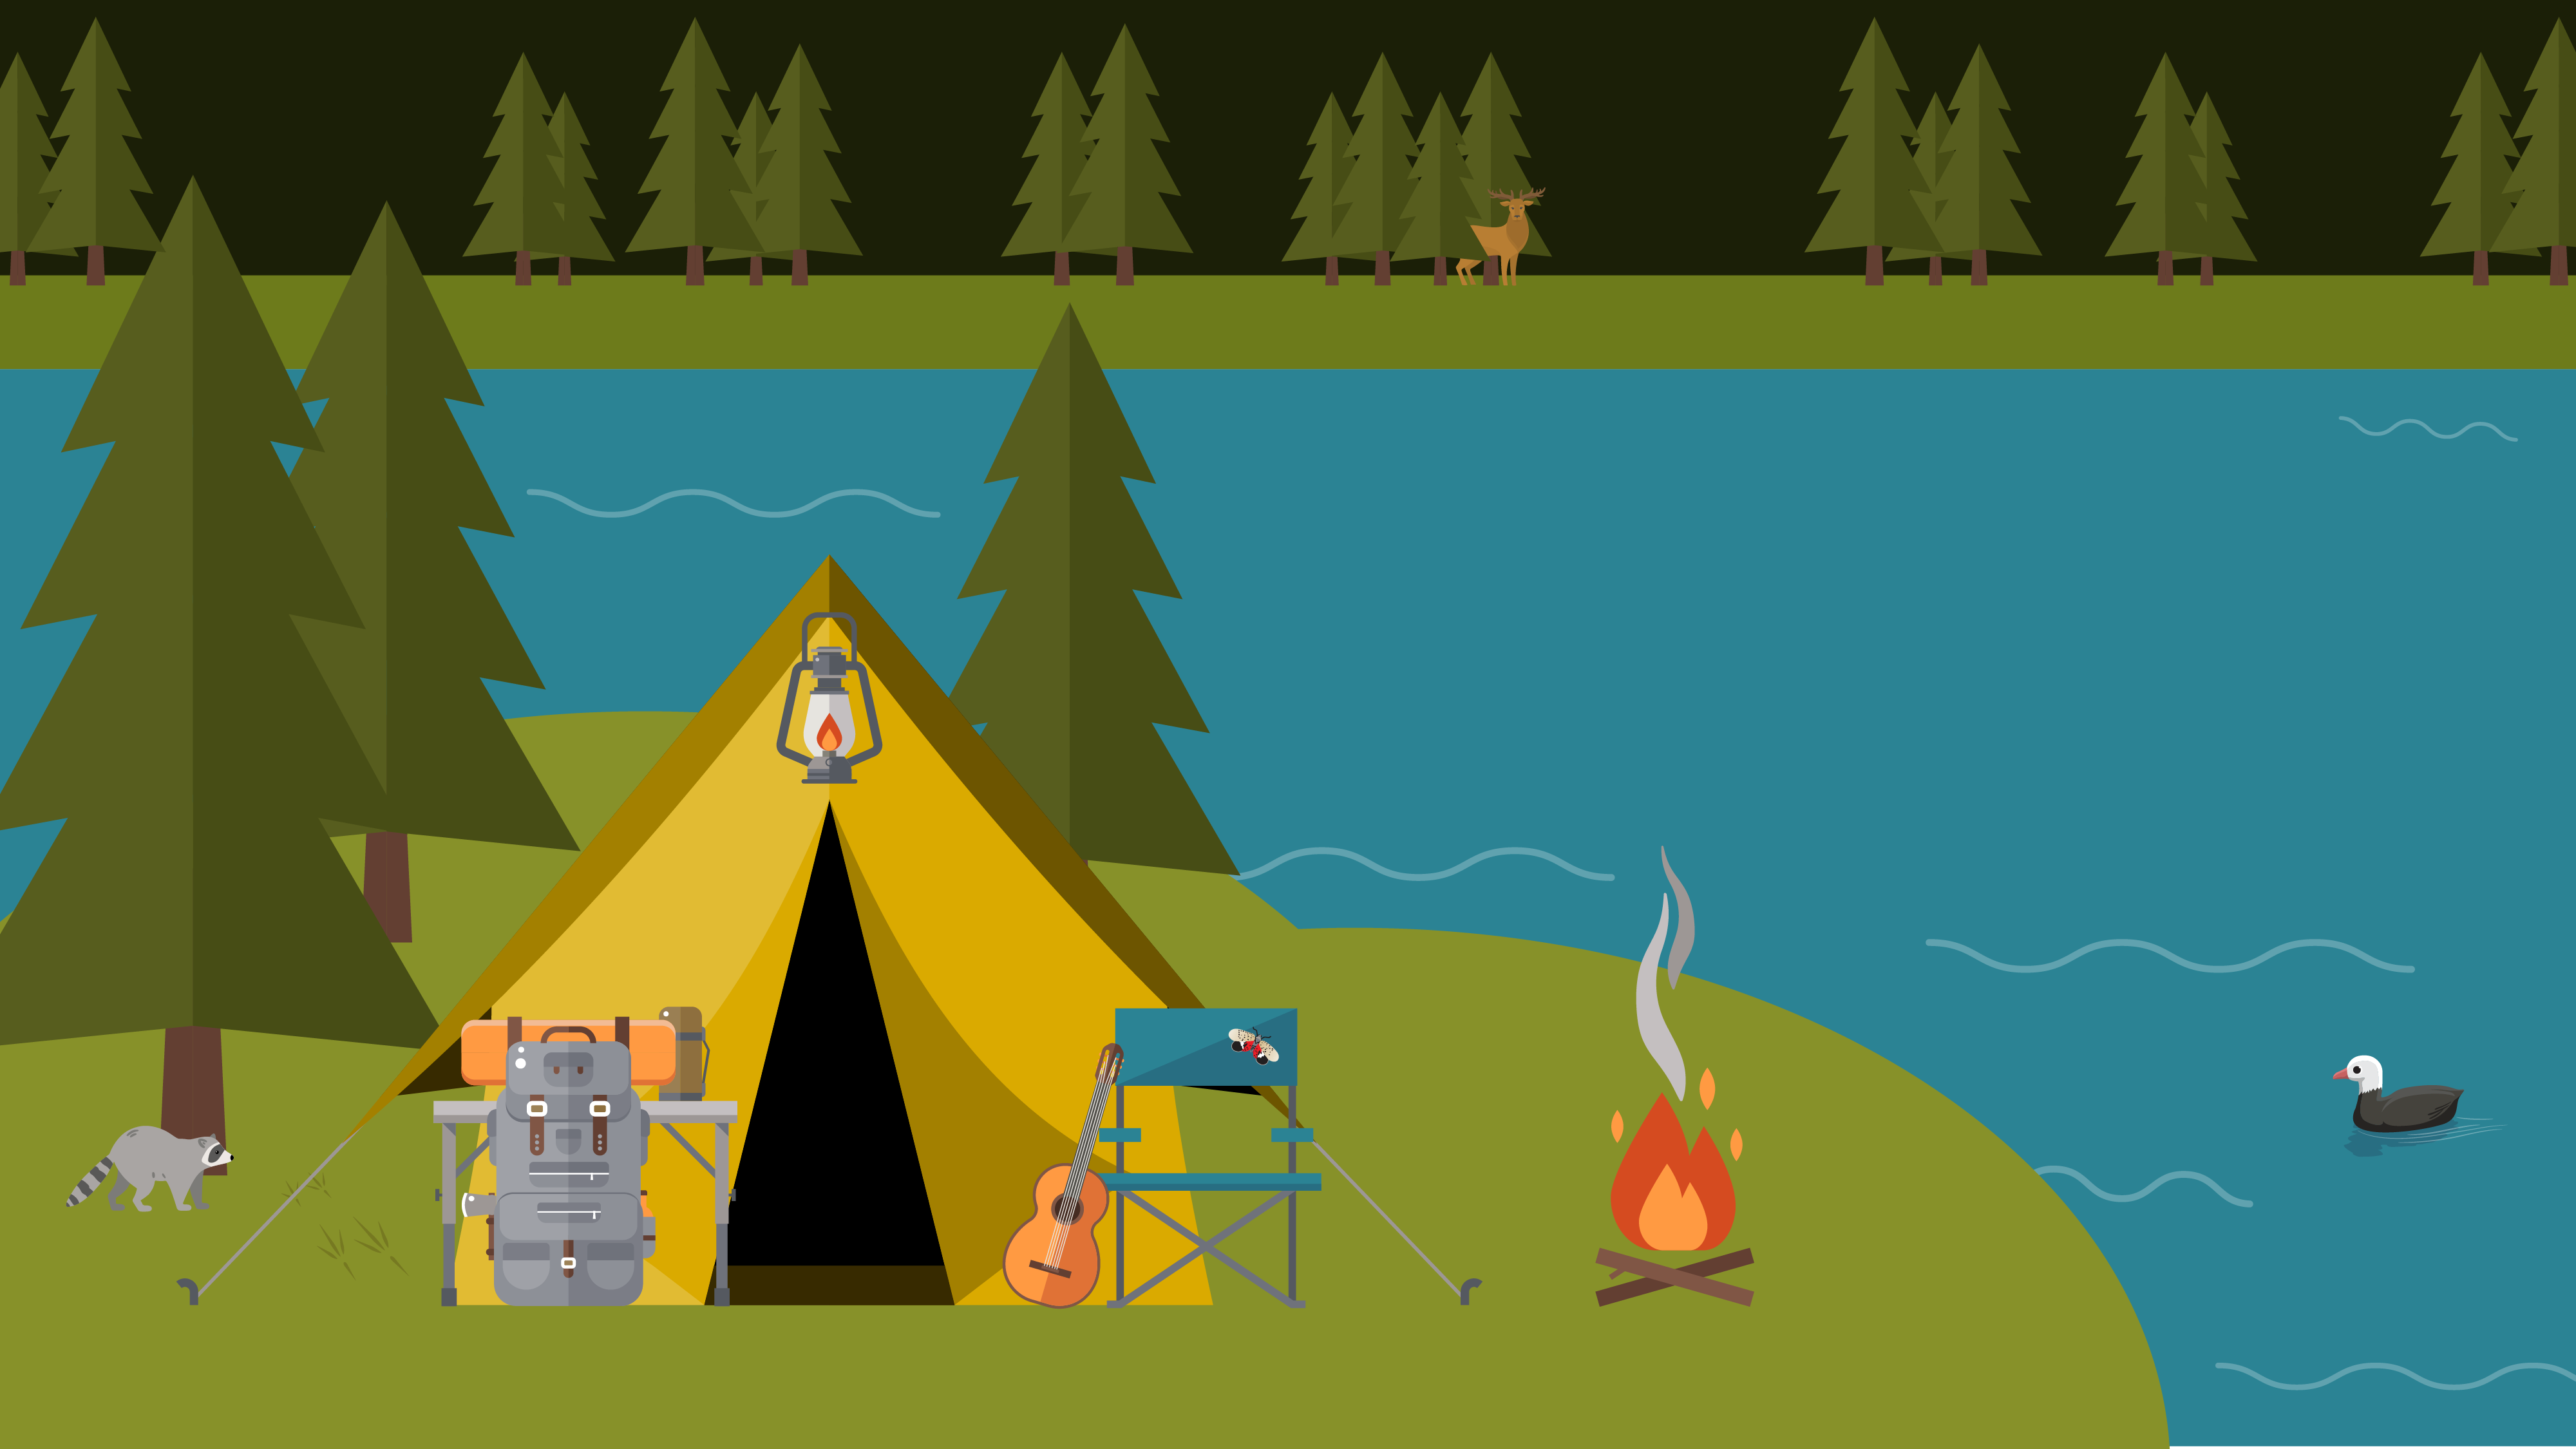 Illistration of camp site